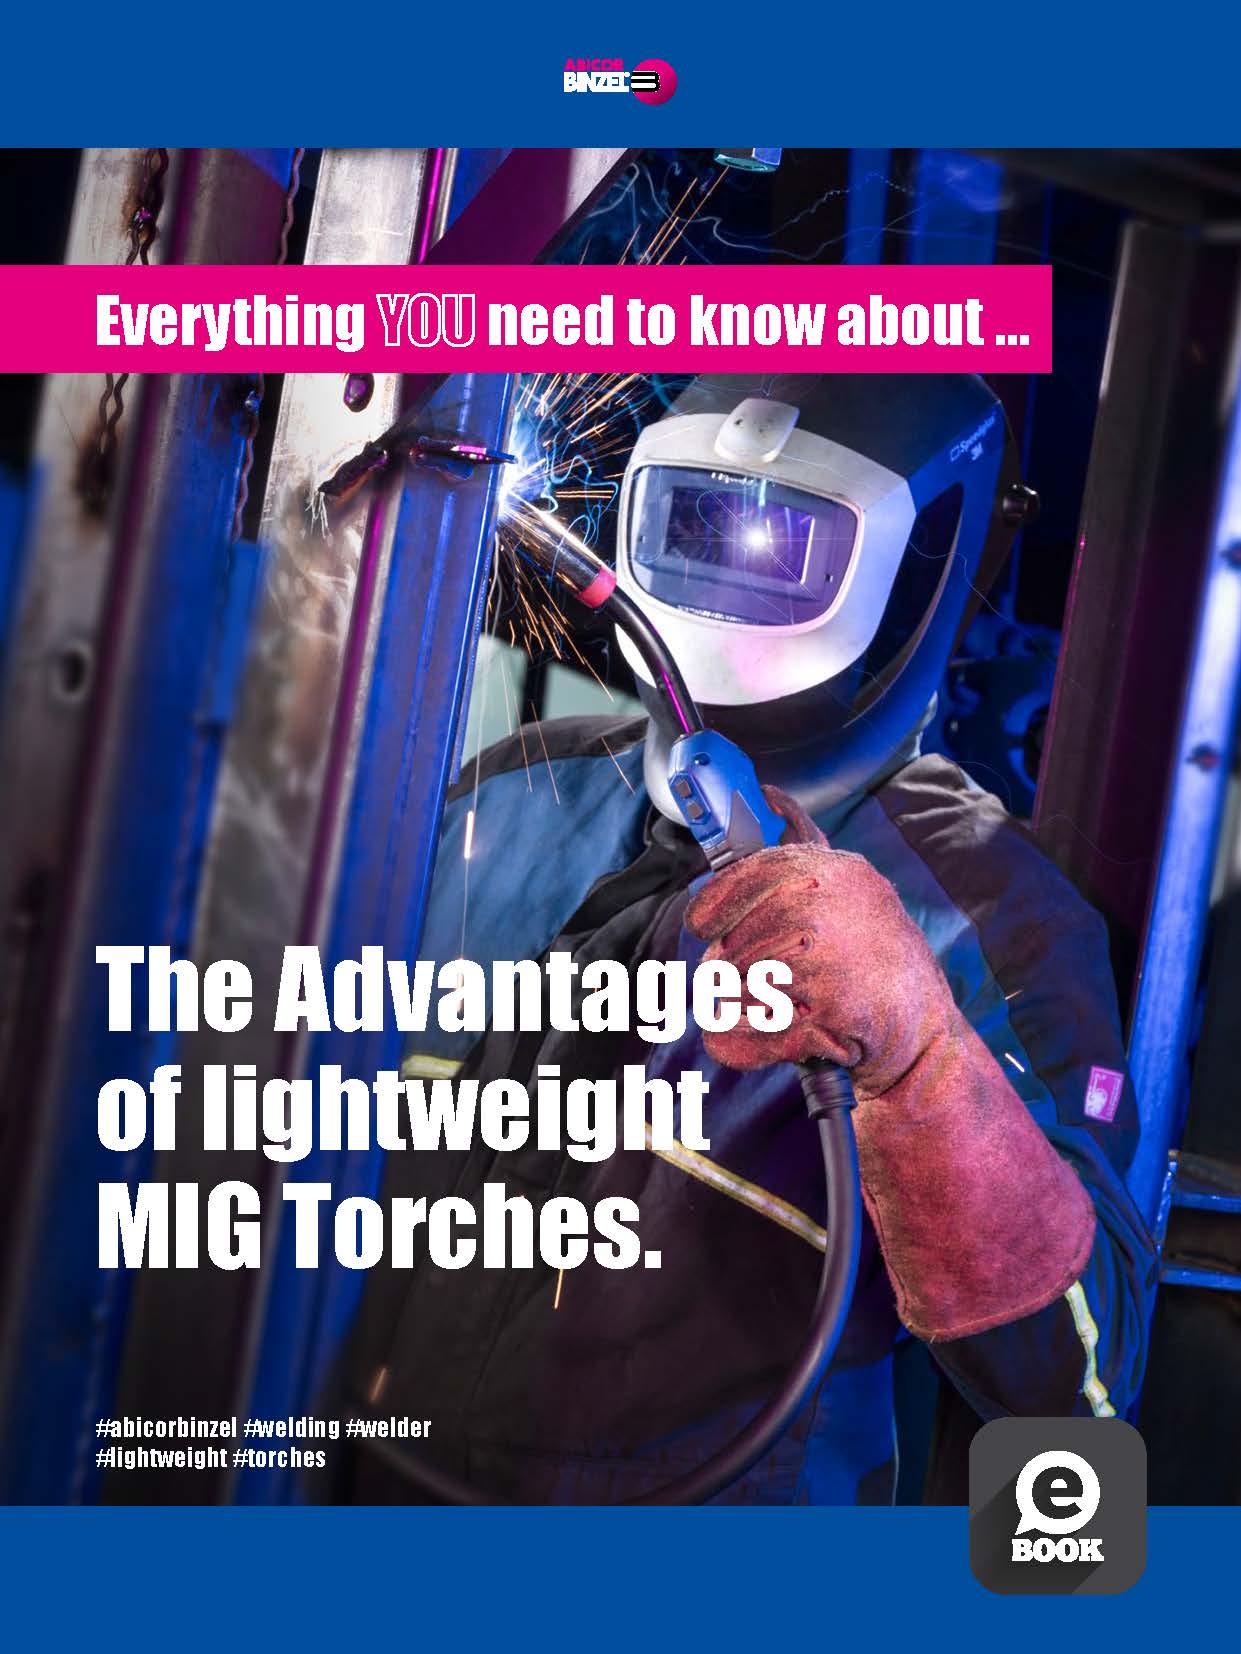 The Advantages of lightweight MIG Torches